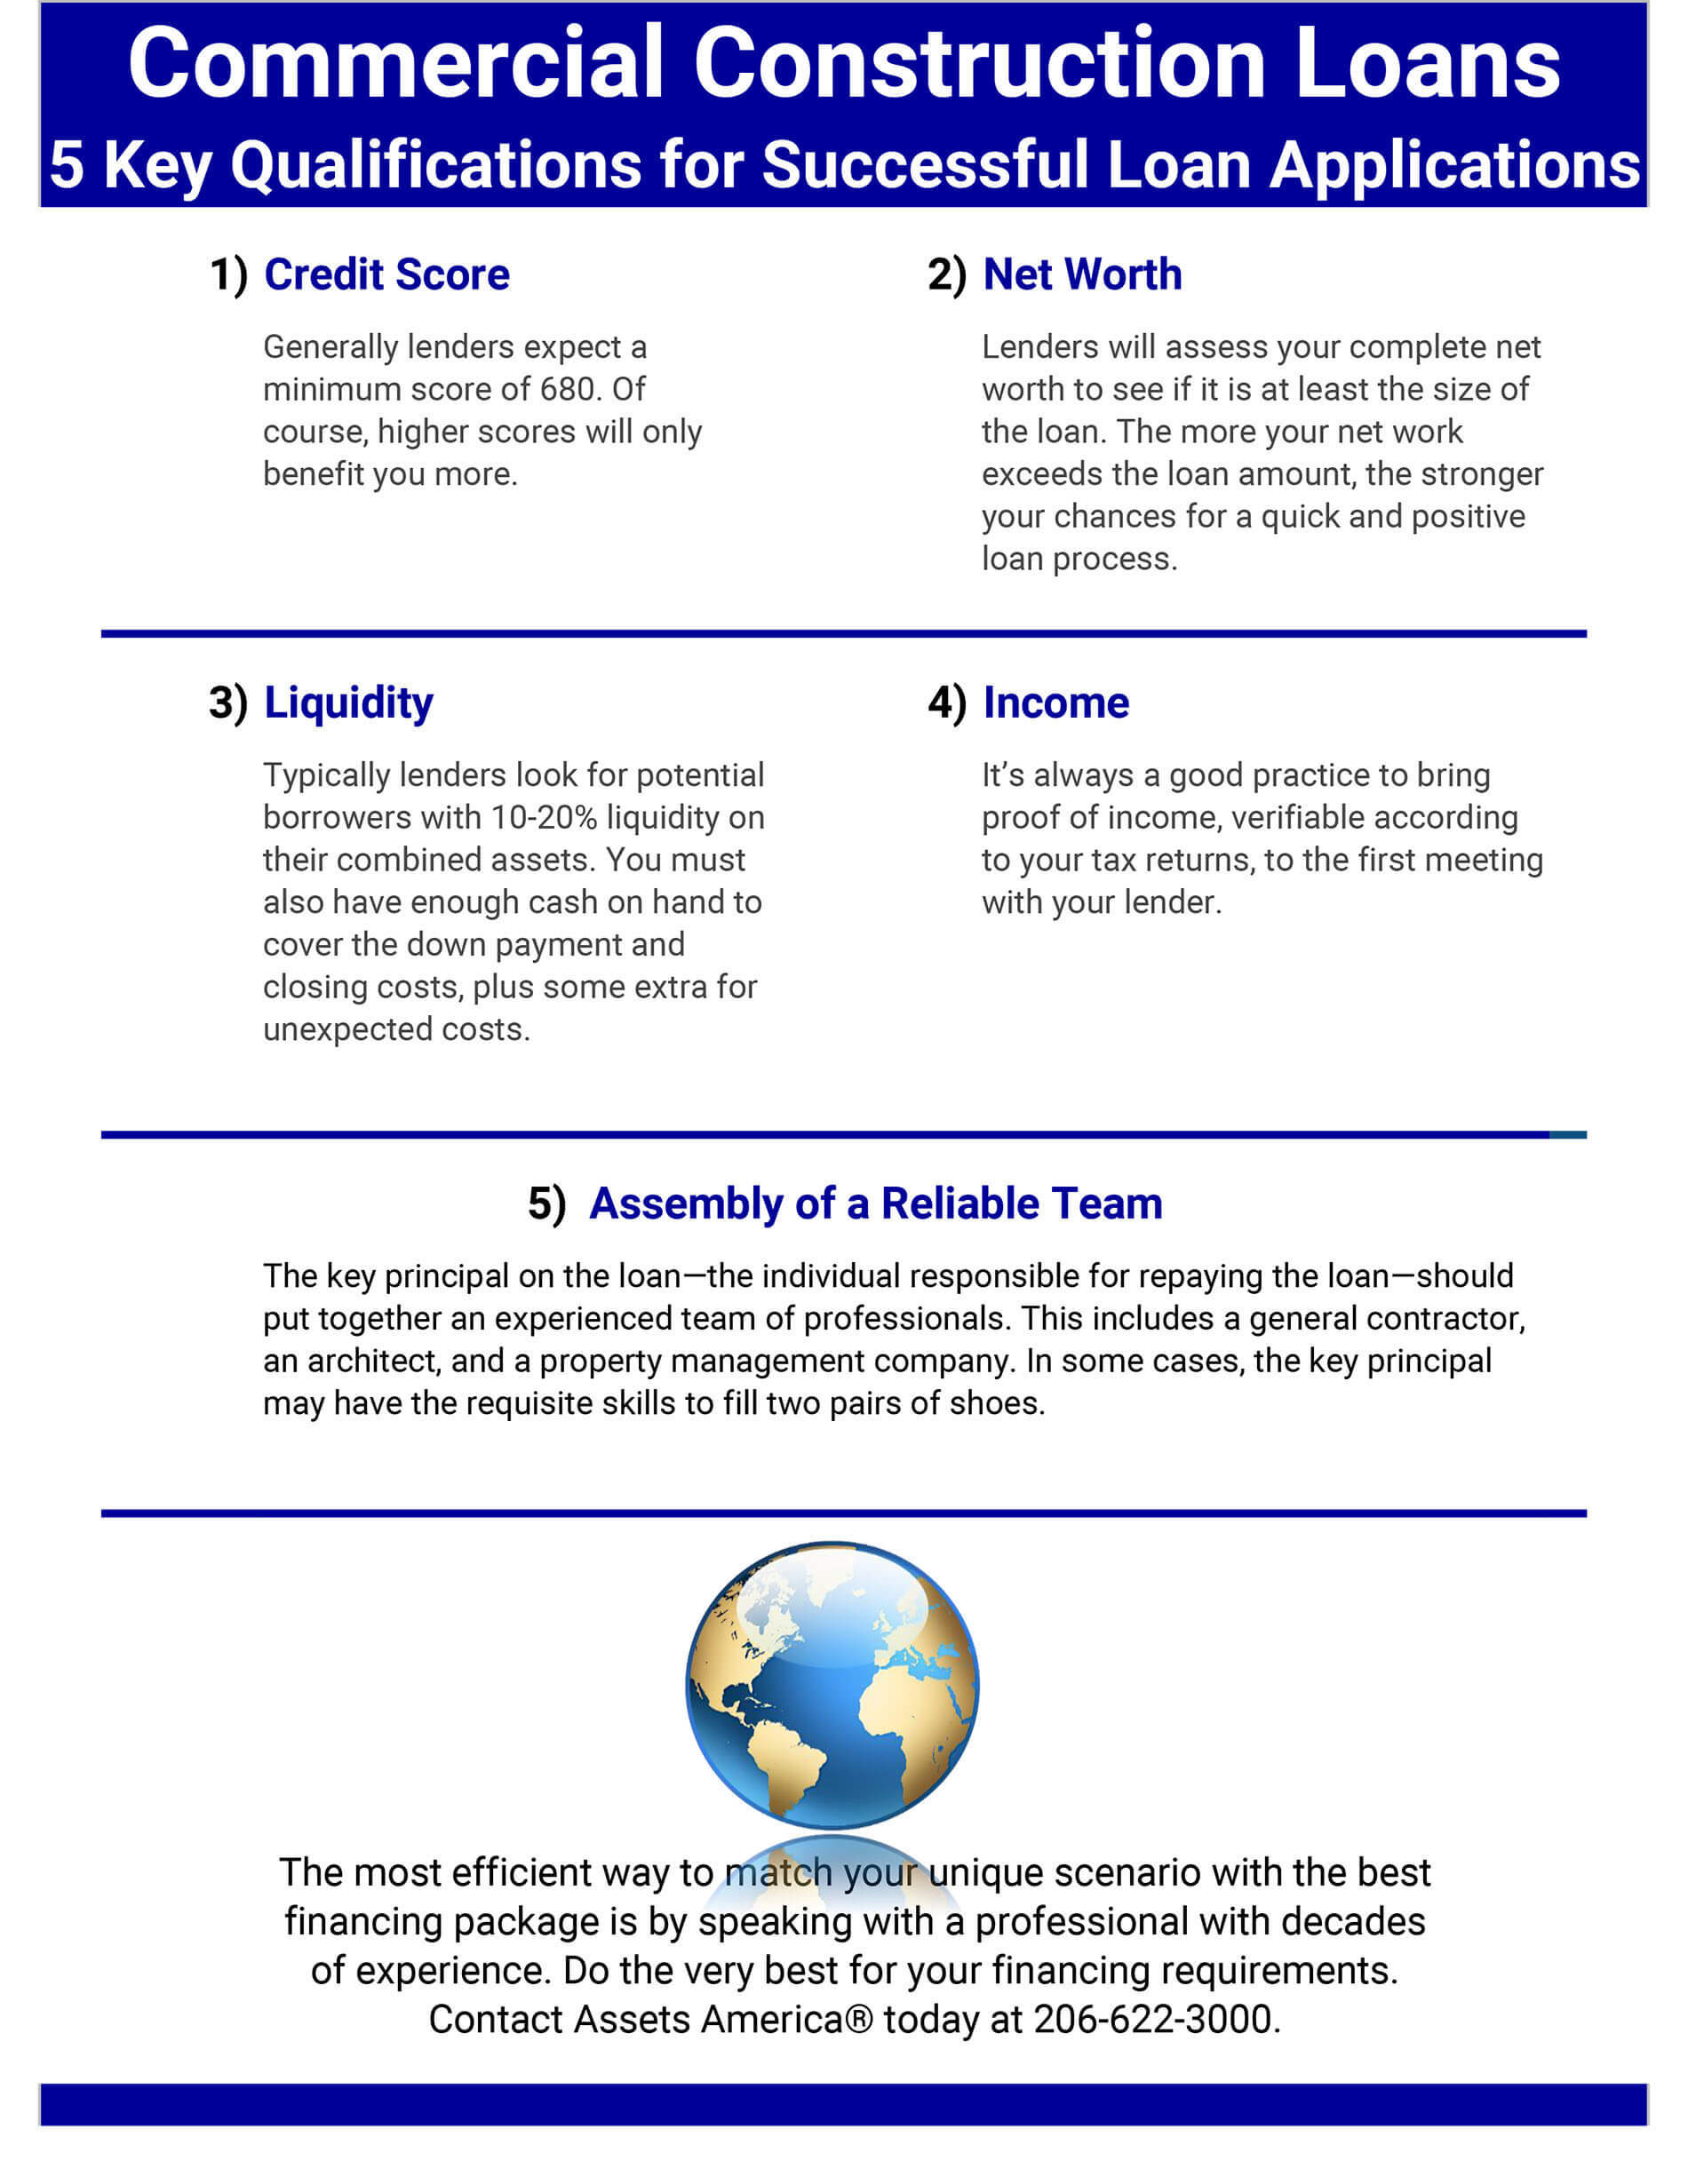 Commercial Construction Loans infographic